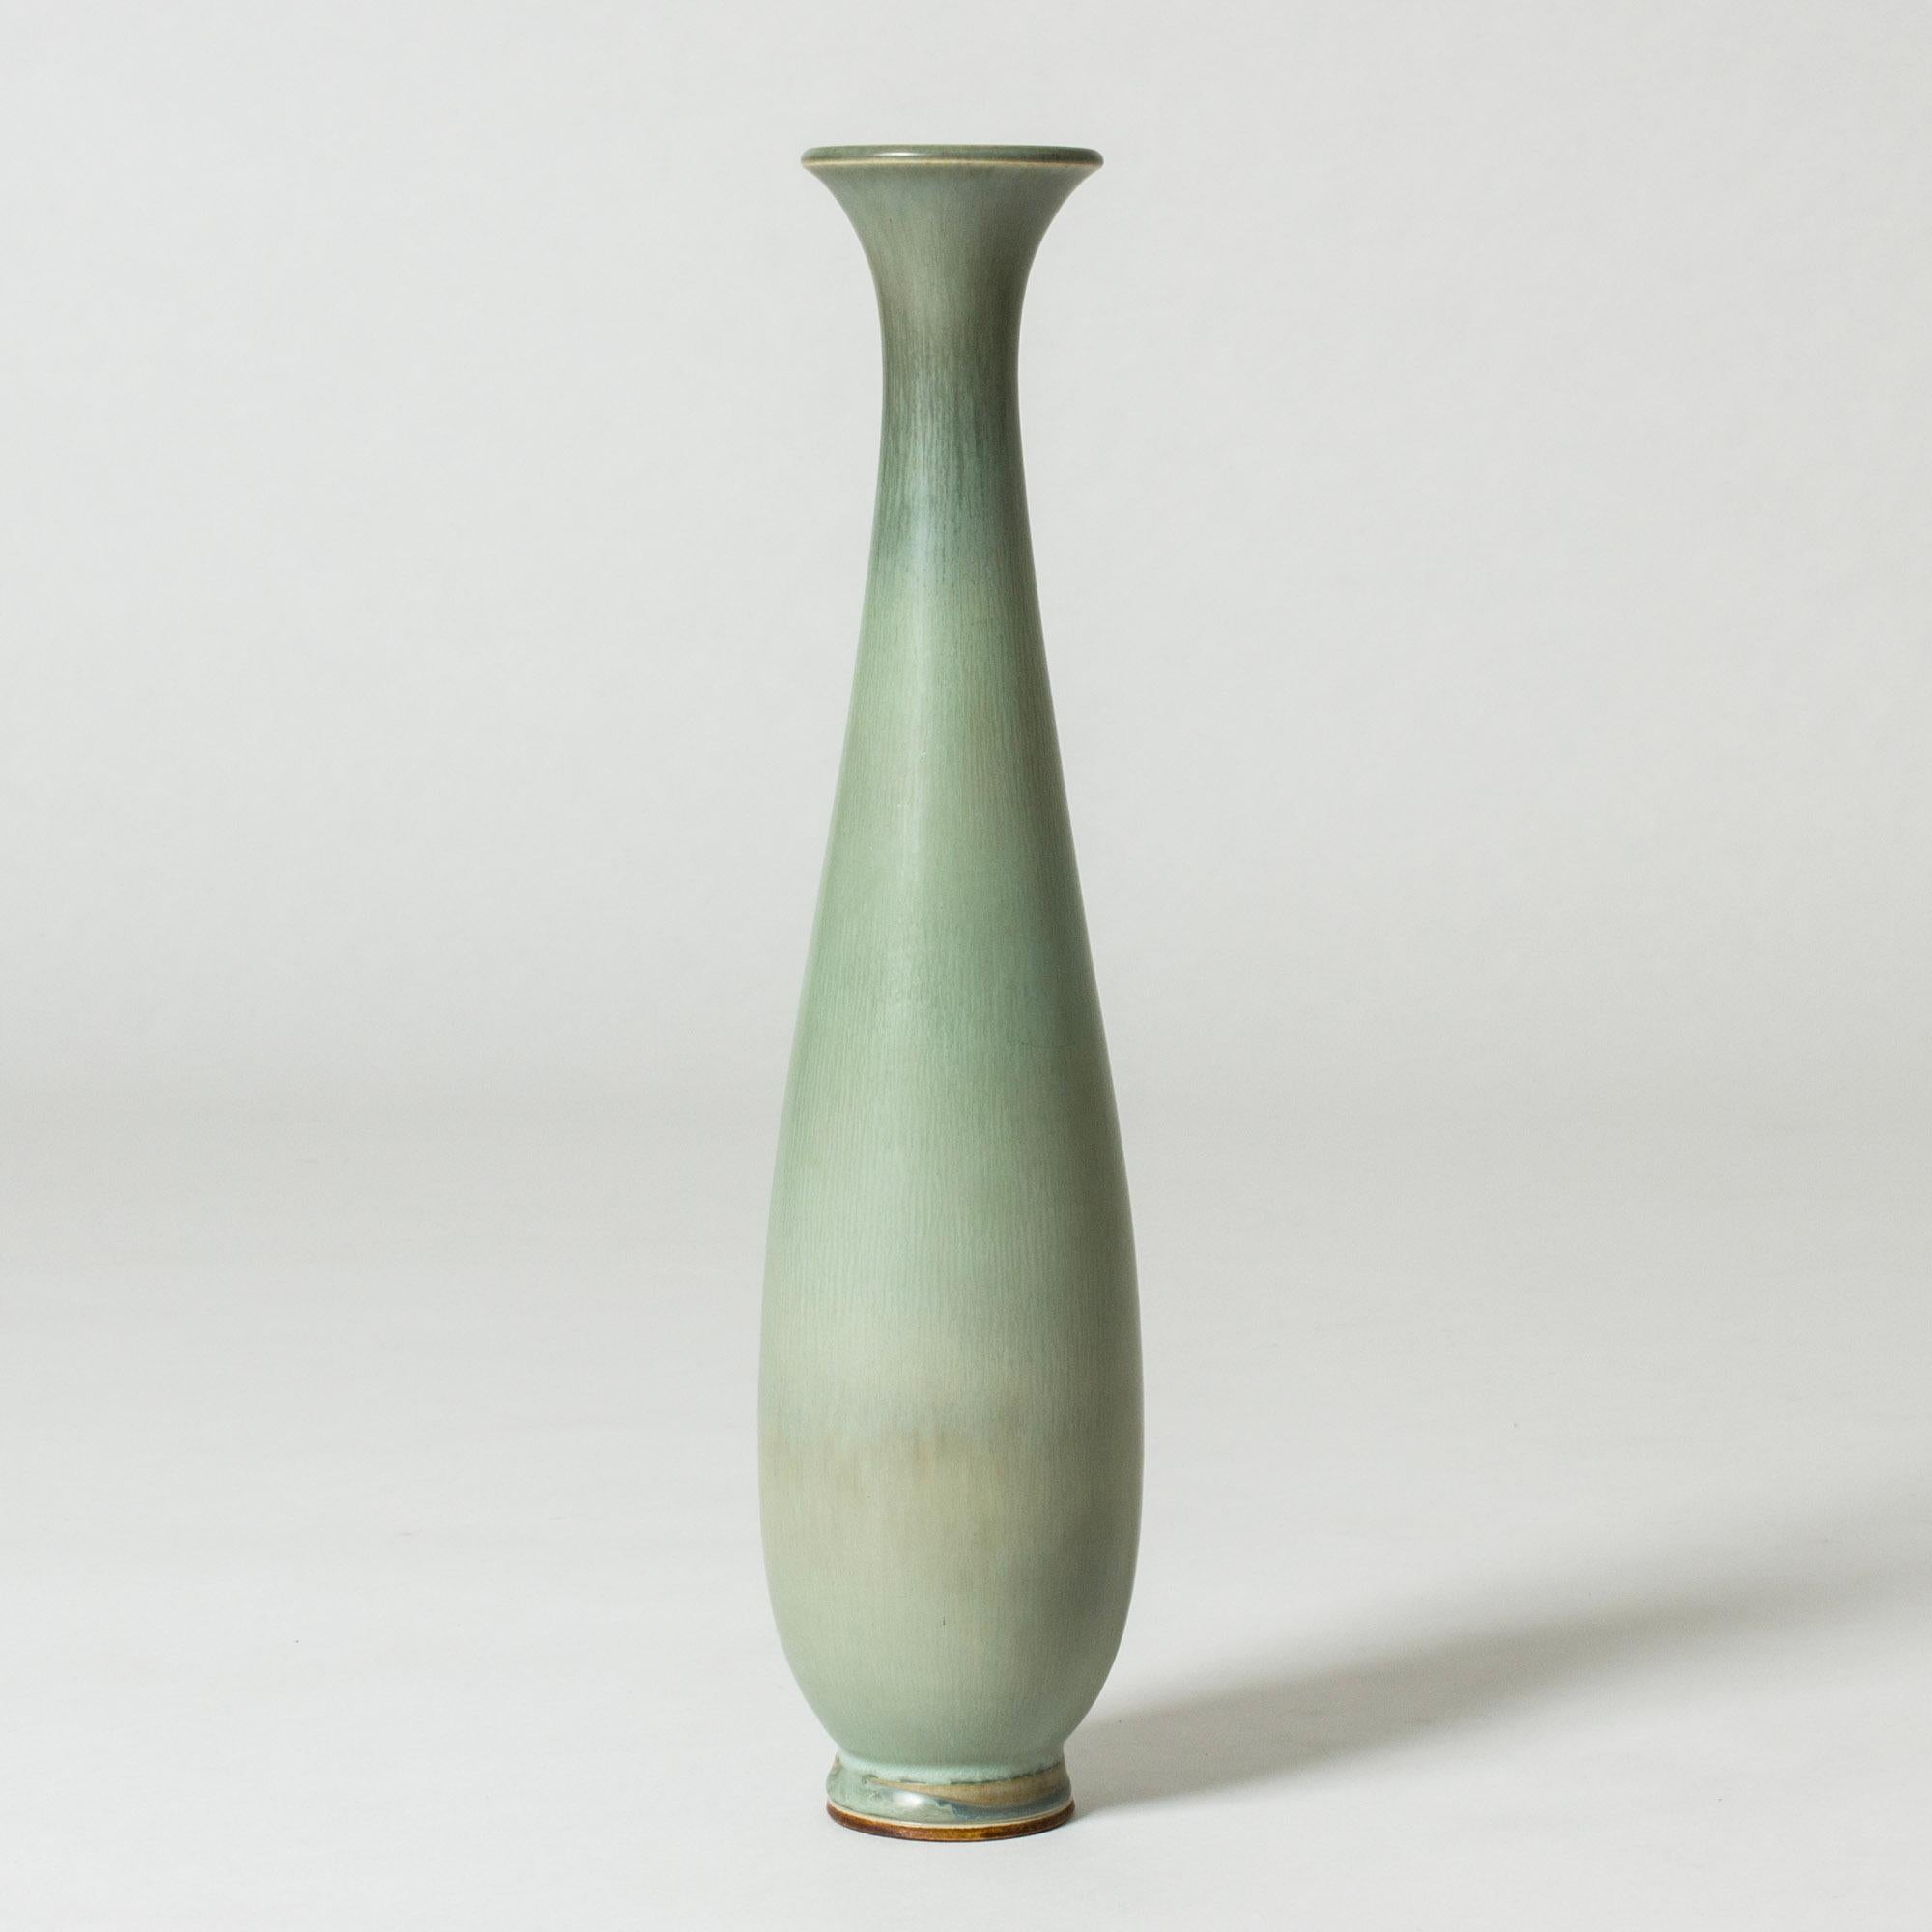 Beautiful stoneware vase by Berndt Friberg in a long elegantly curved form. Pale celadon green glaze.

Berndt Friberg was a Swedish ceramicist, renowned for his stoneware vases and vessels for Gustavsberg. His pure, composed designs with satiny,